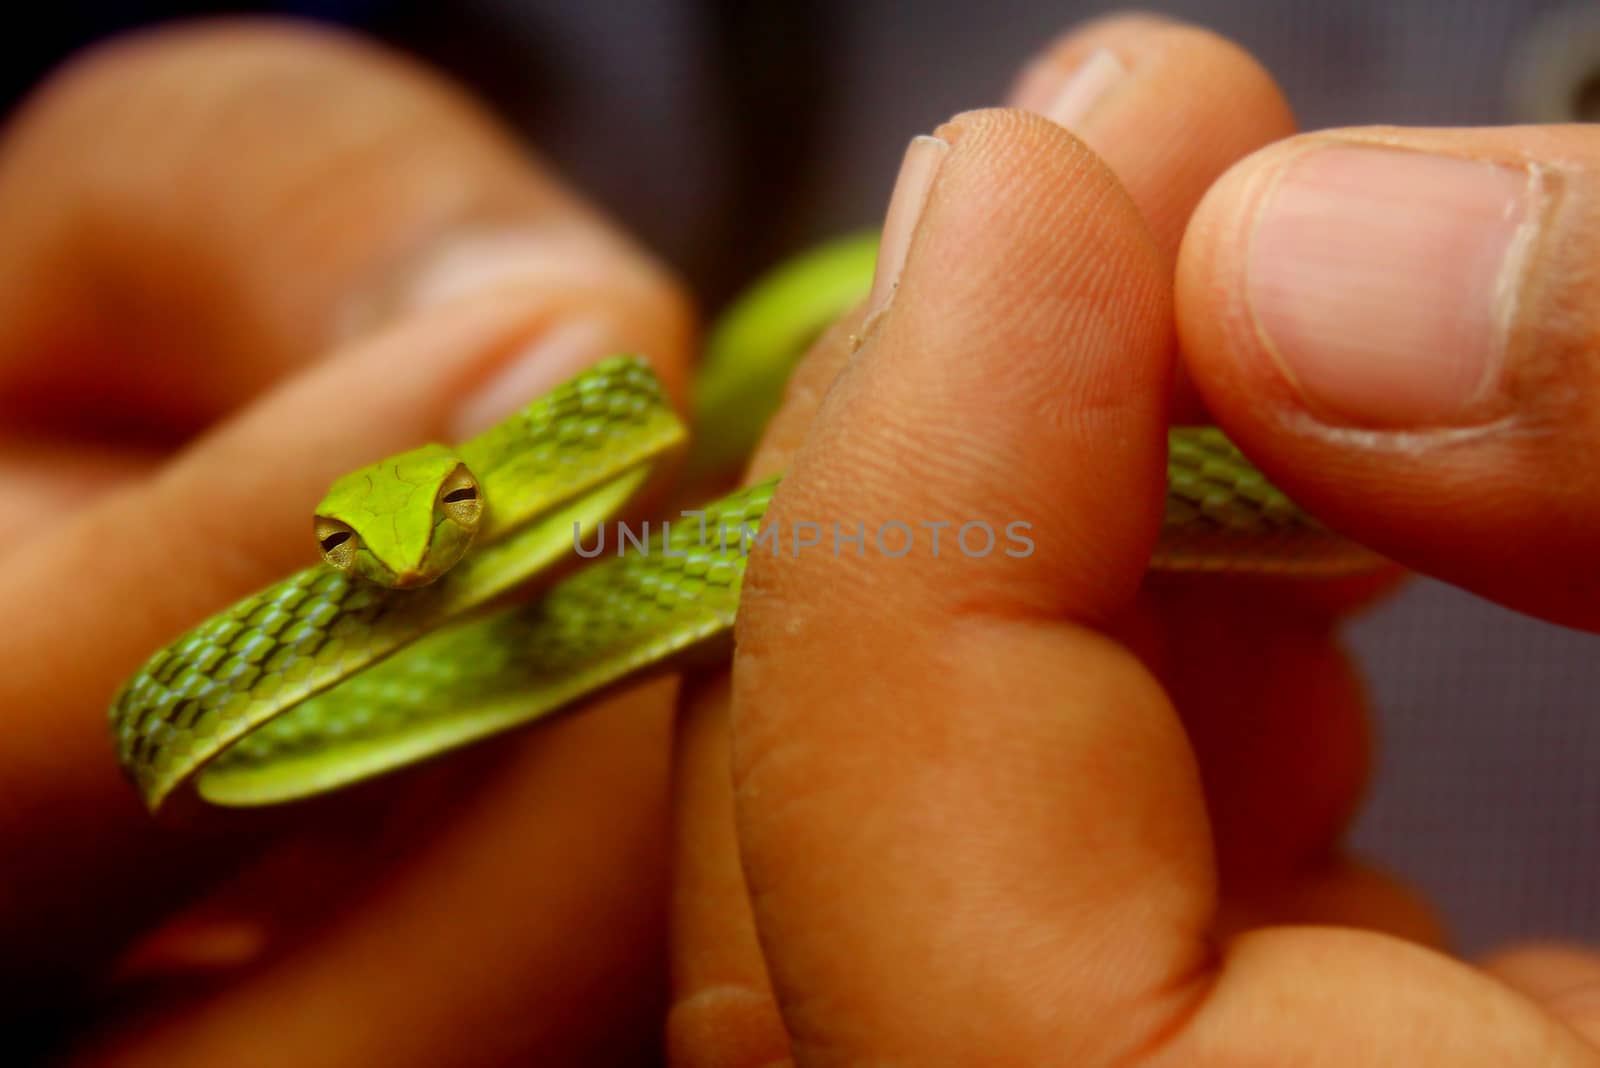 A tiny grass snake from the Indian tropical jungles, held in the hands.